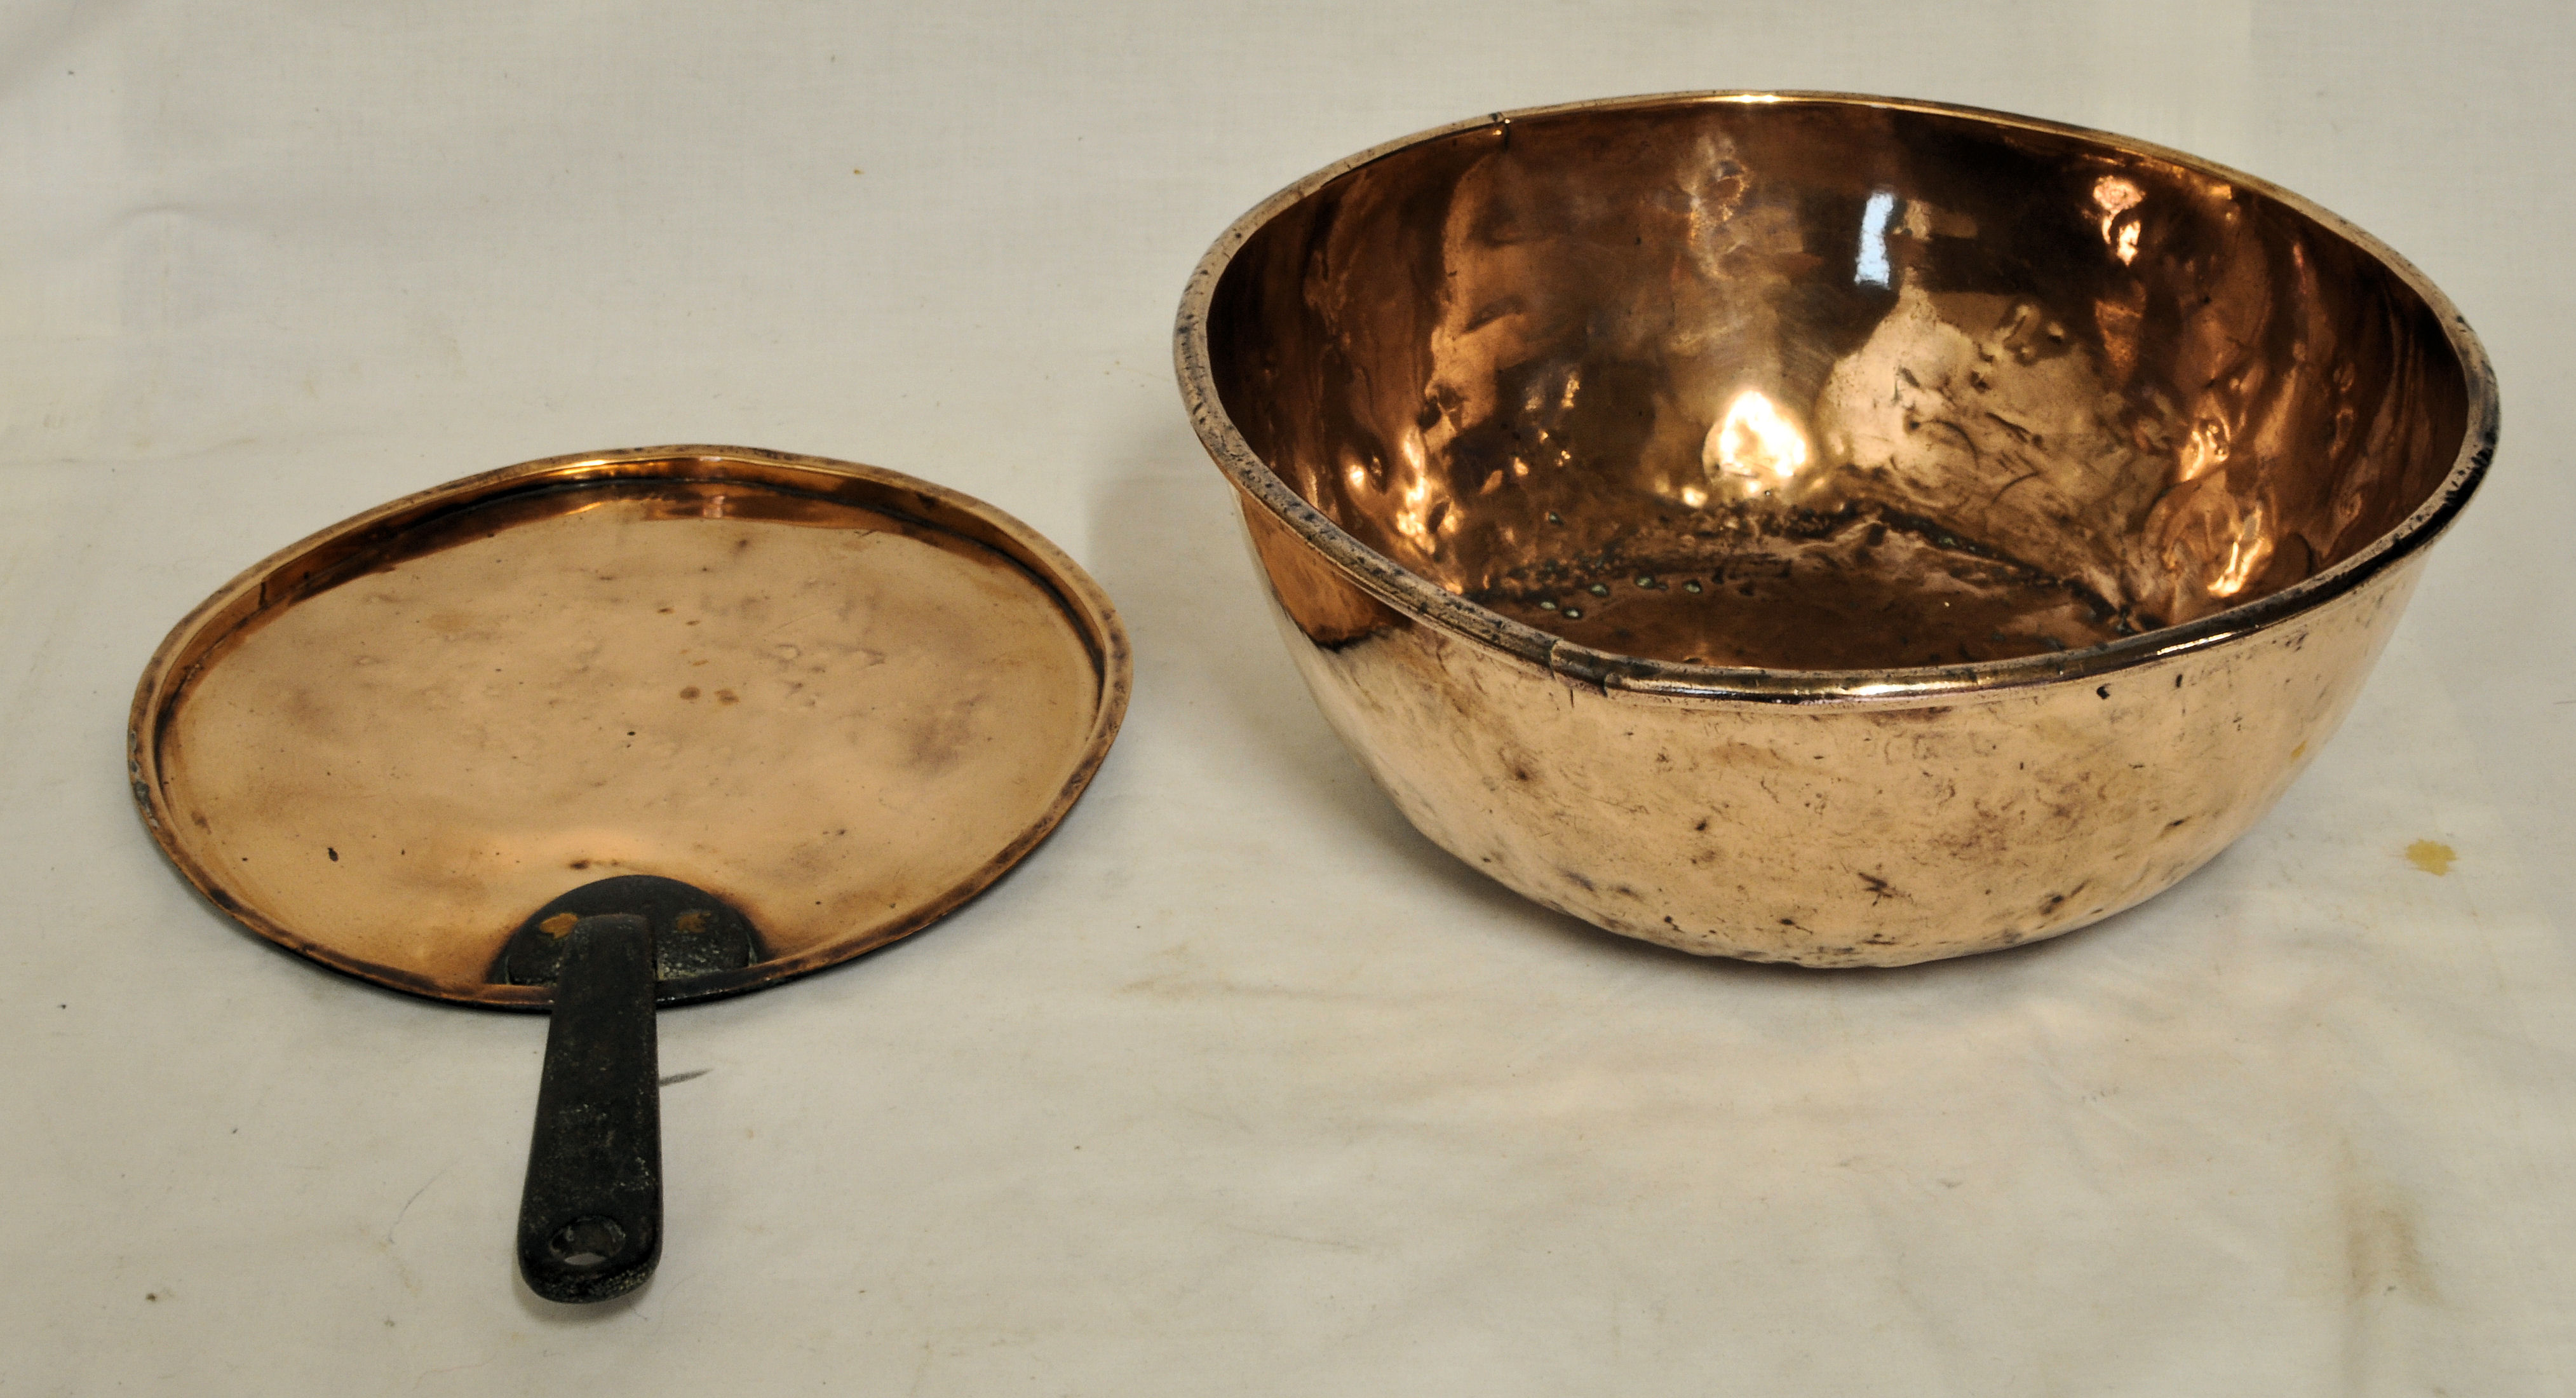 A 19th Century copper circular Mixing Bowl, 11" (28cms) diameter and a 19th Century copper